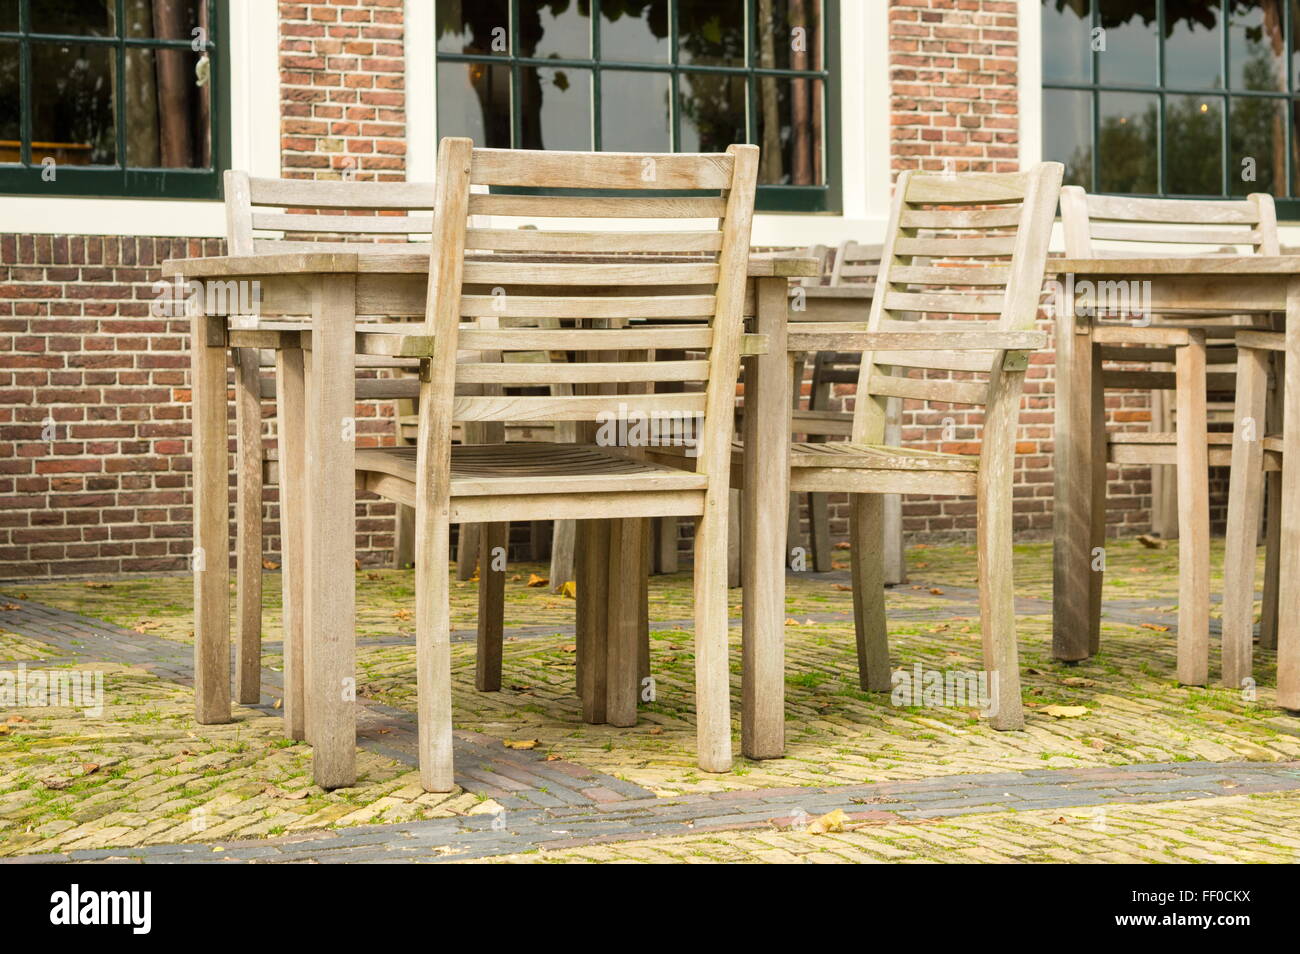 set of wooden table and chairs outside Stock Photo